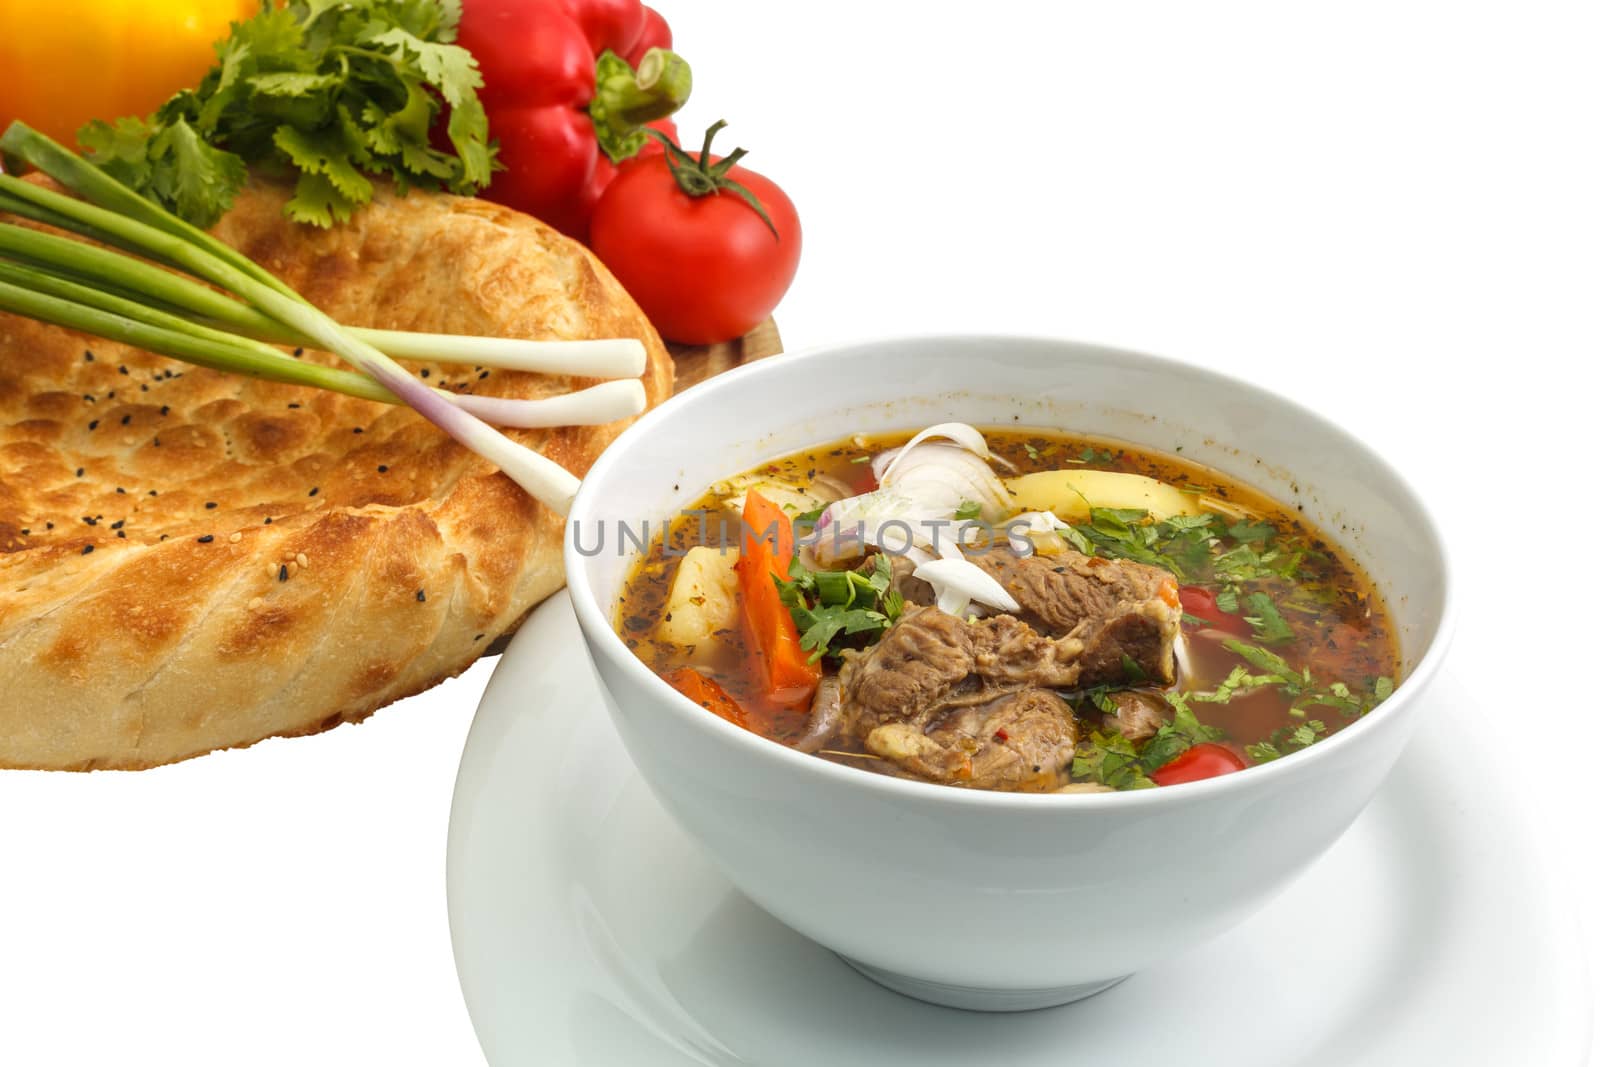 Kharcho soup with bread and vegetables by fogen